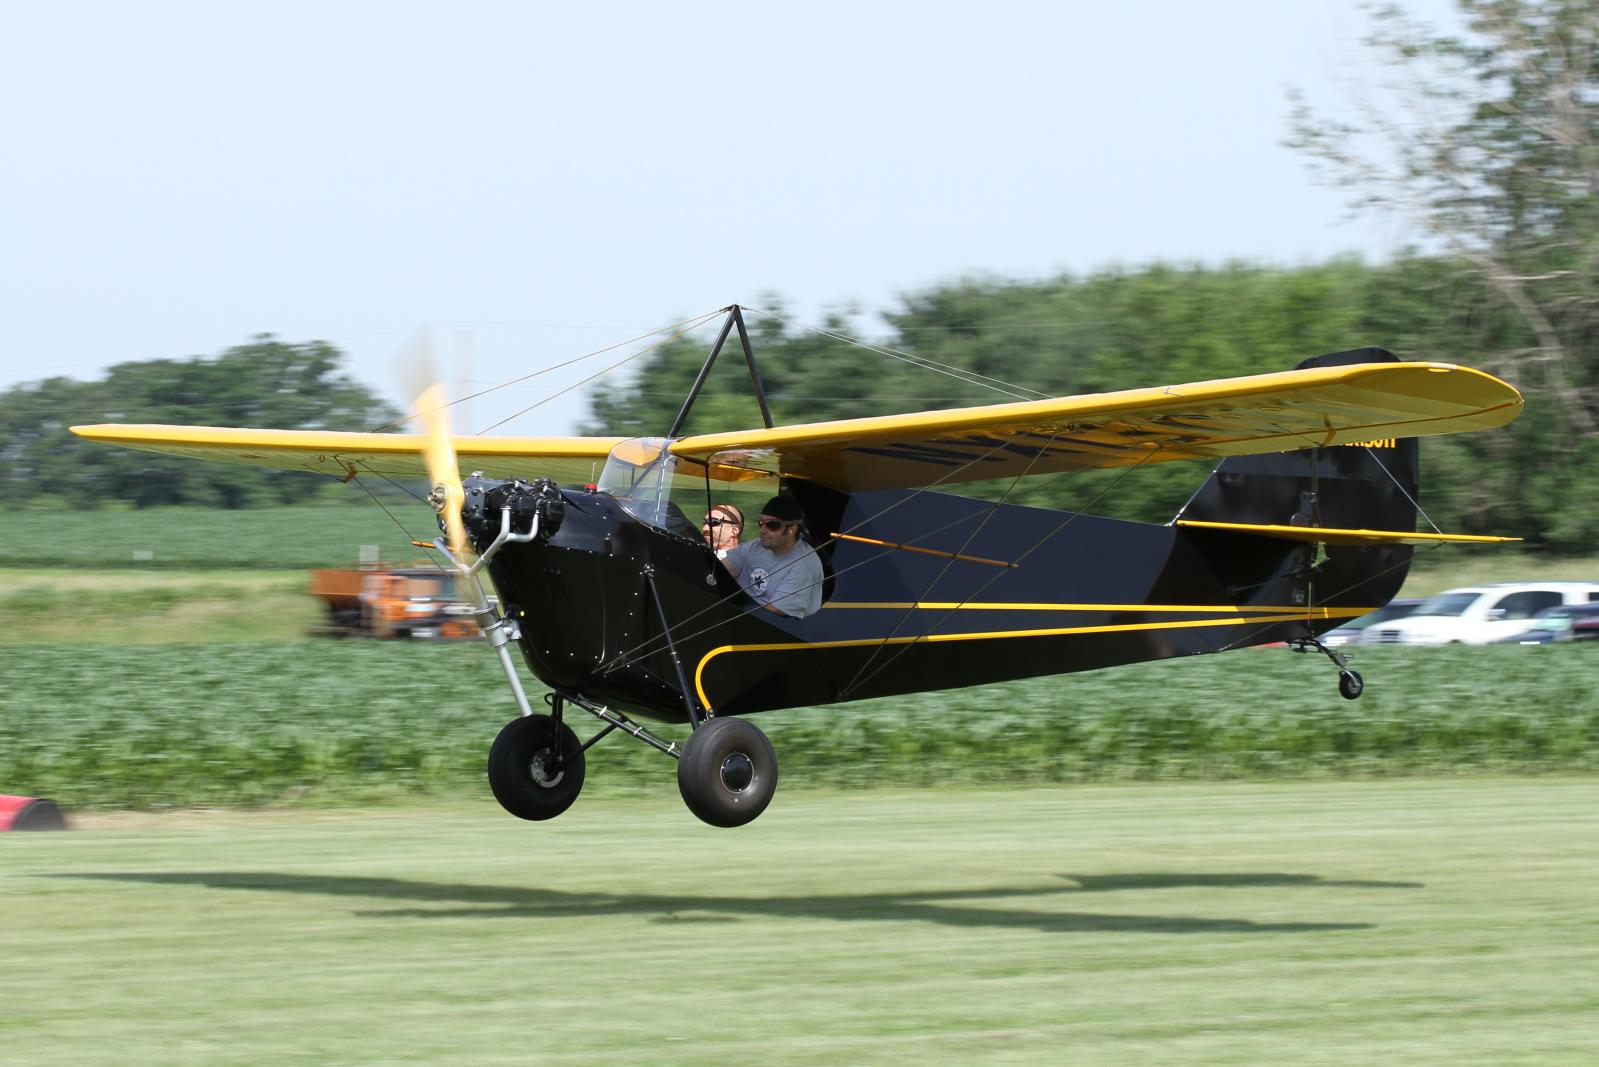 a person flying a small plane in the air